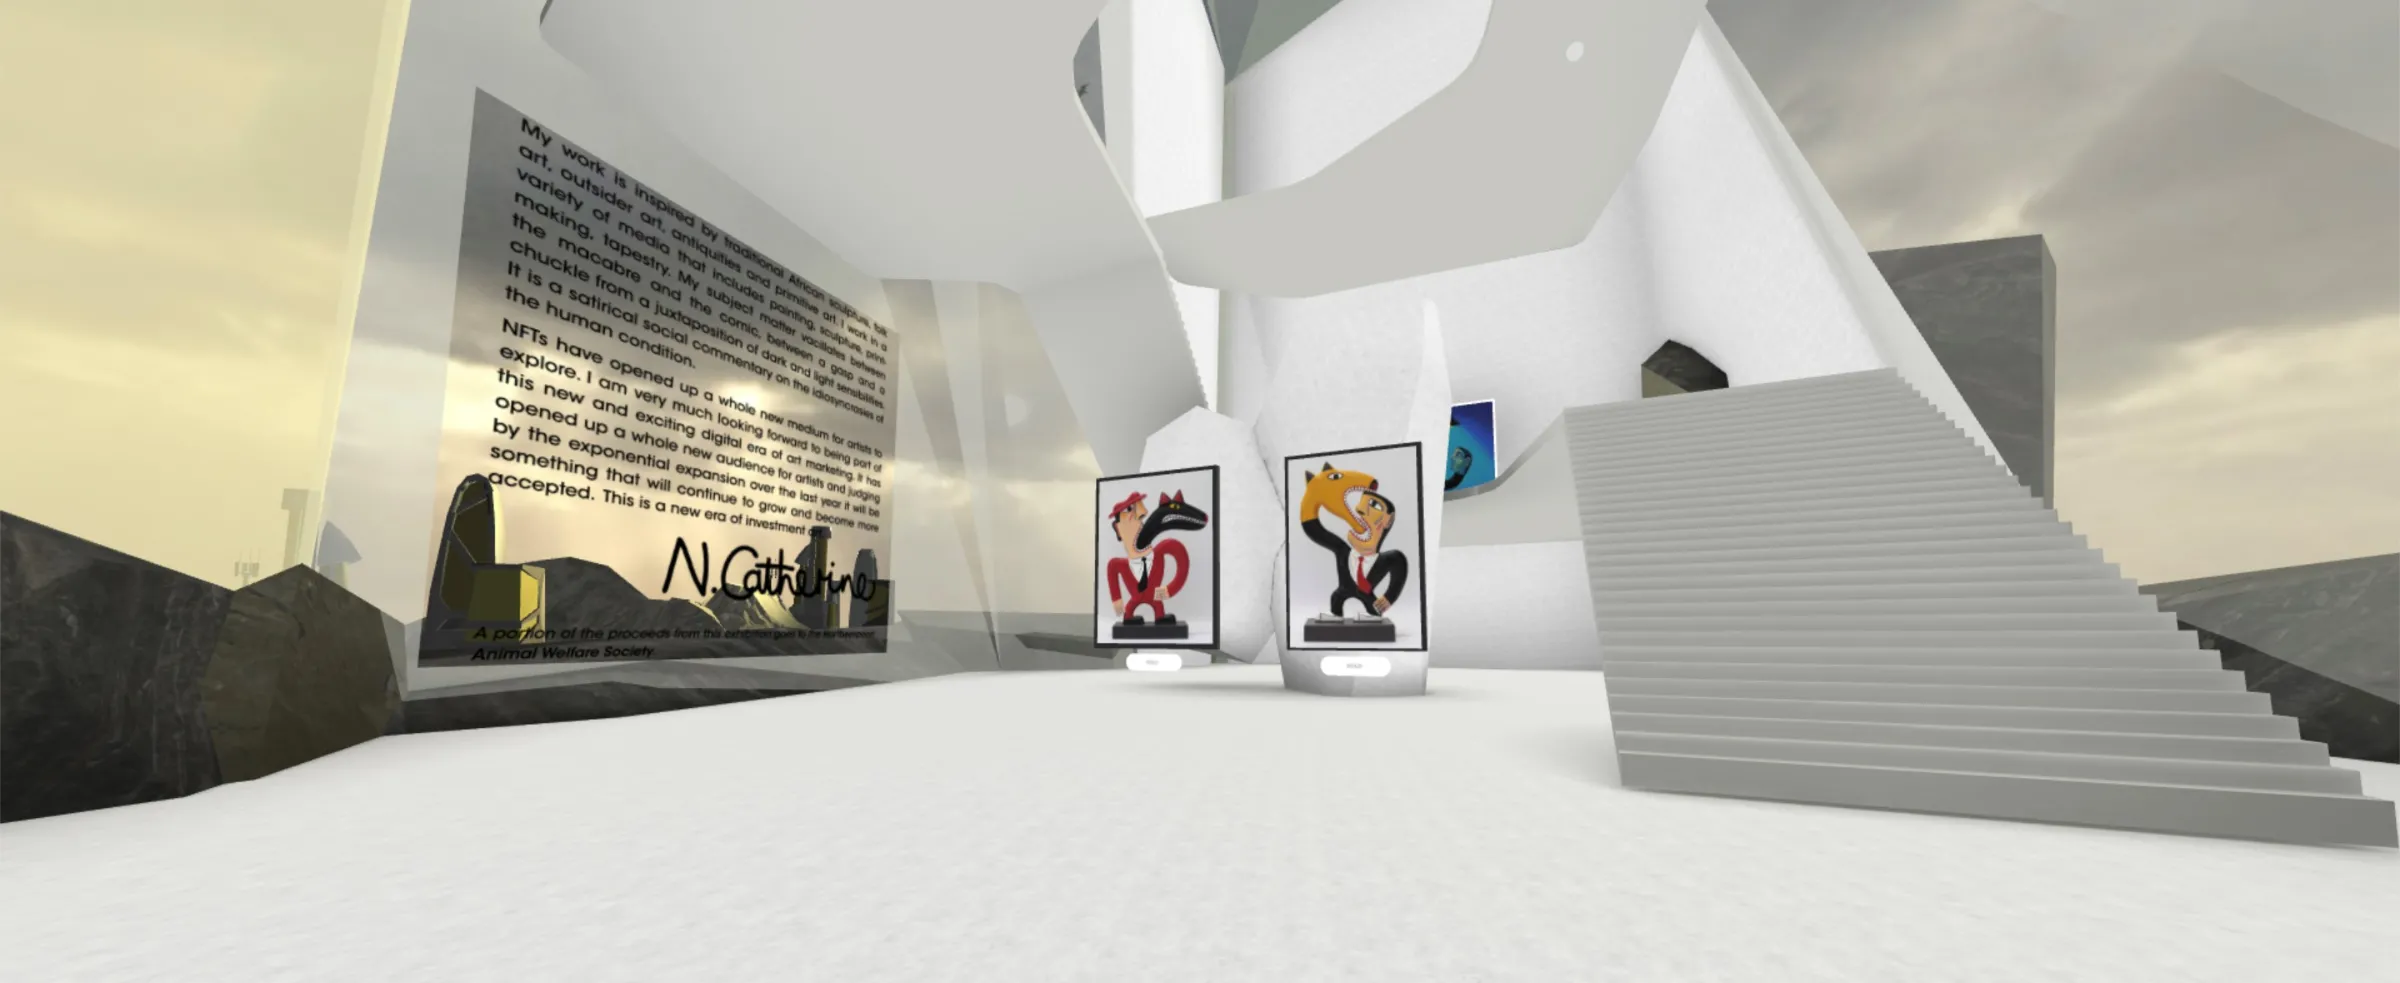 A metaverse NFT exhibition of South African artist Norman Catherine’s work in Ubuntuland